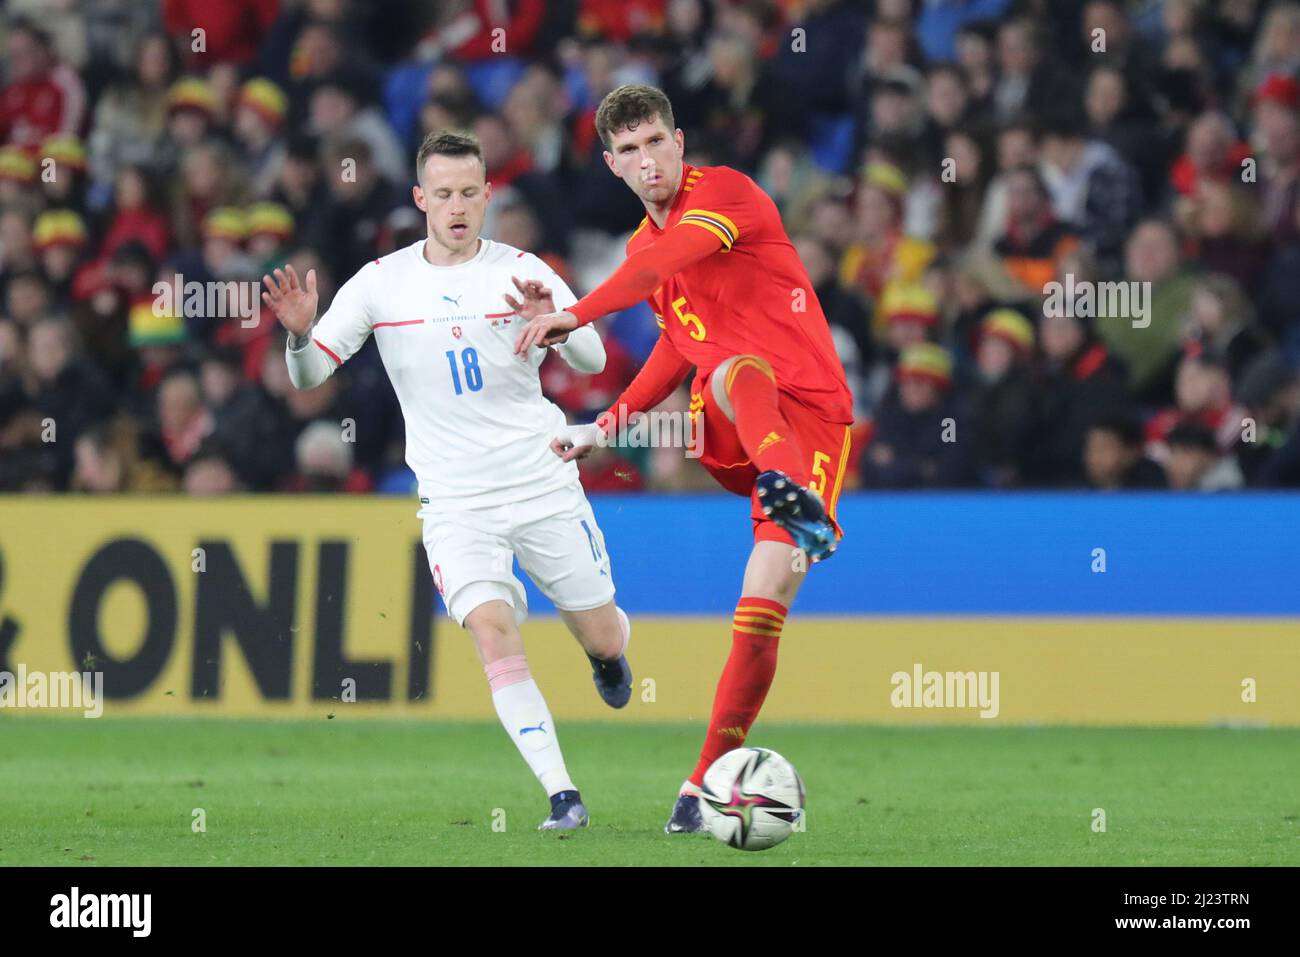 Cardiff, Wales, UK. 29th Mar, 2022. Jan Sykora of Czech Republic and Chris Mepham of Wales during the friendly international between Wales and Czech Republic in aid of the Ukraine humanitarian appeal at the Cardiff City Stadium. Credit: Mark Hawkins/Alamy Live News Stock Photo